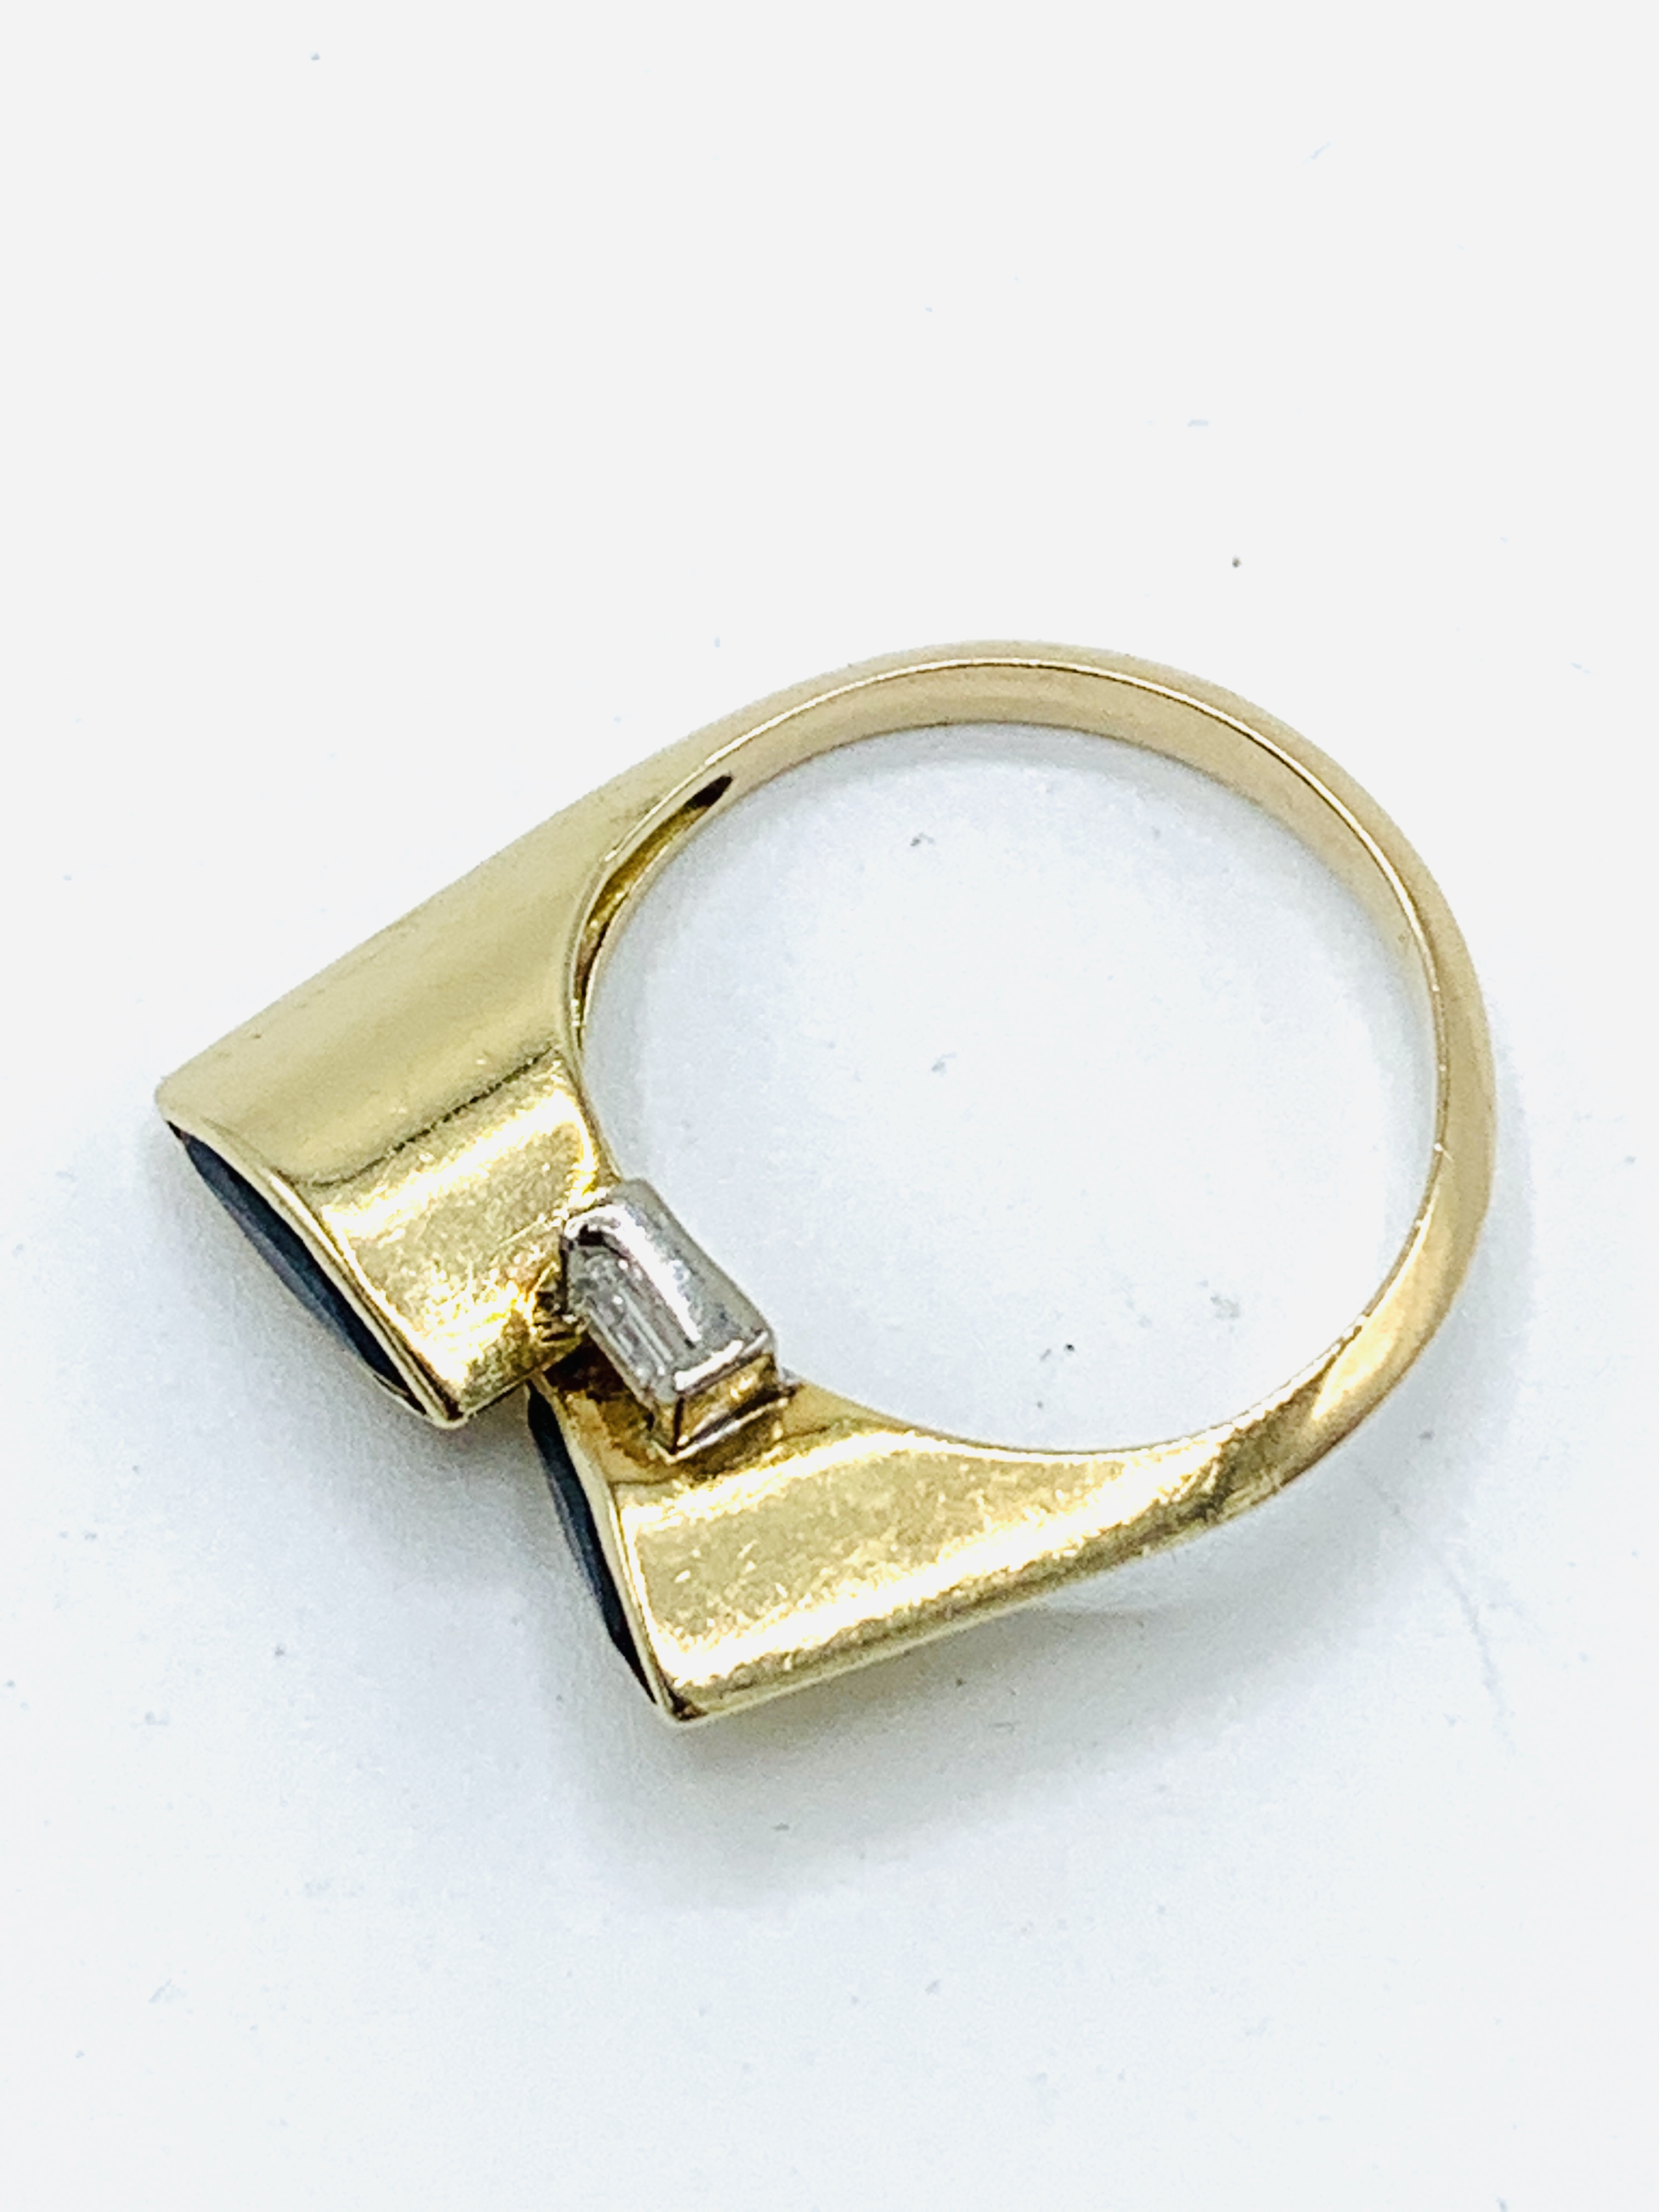 Contemporary 18ct gold, sapphire and diamond ring - Image 3 of 4